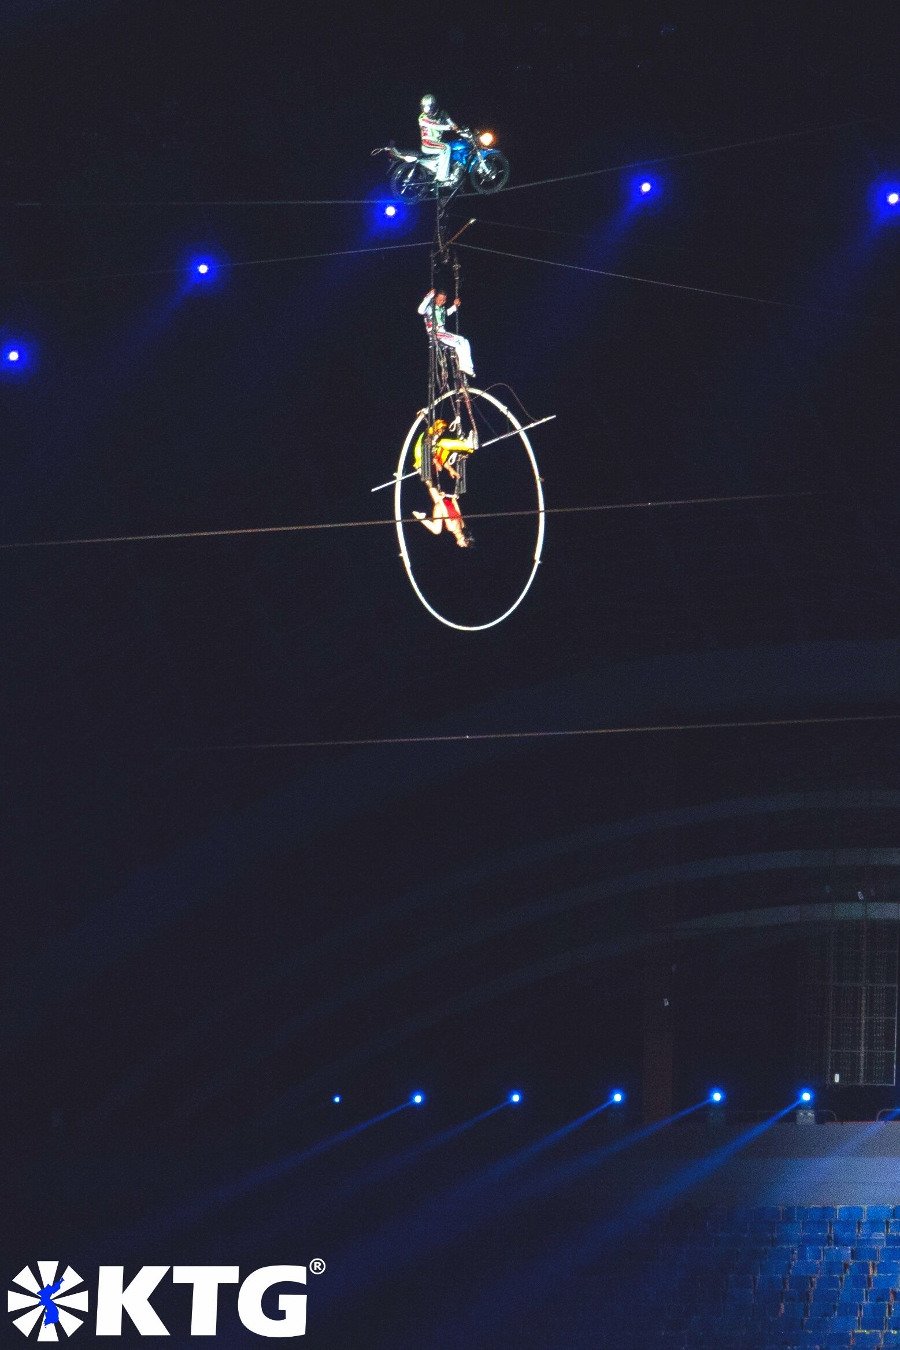 Motorbike on a line and acrobatics show at the Mass Games in North Korea, DPRK. Photo in North Korea taken by KTG Tours